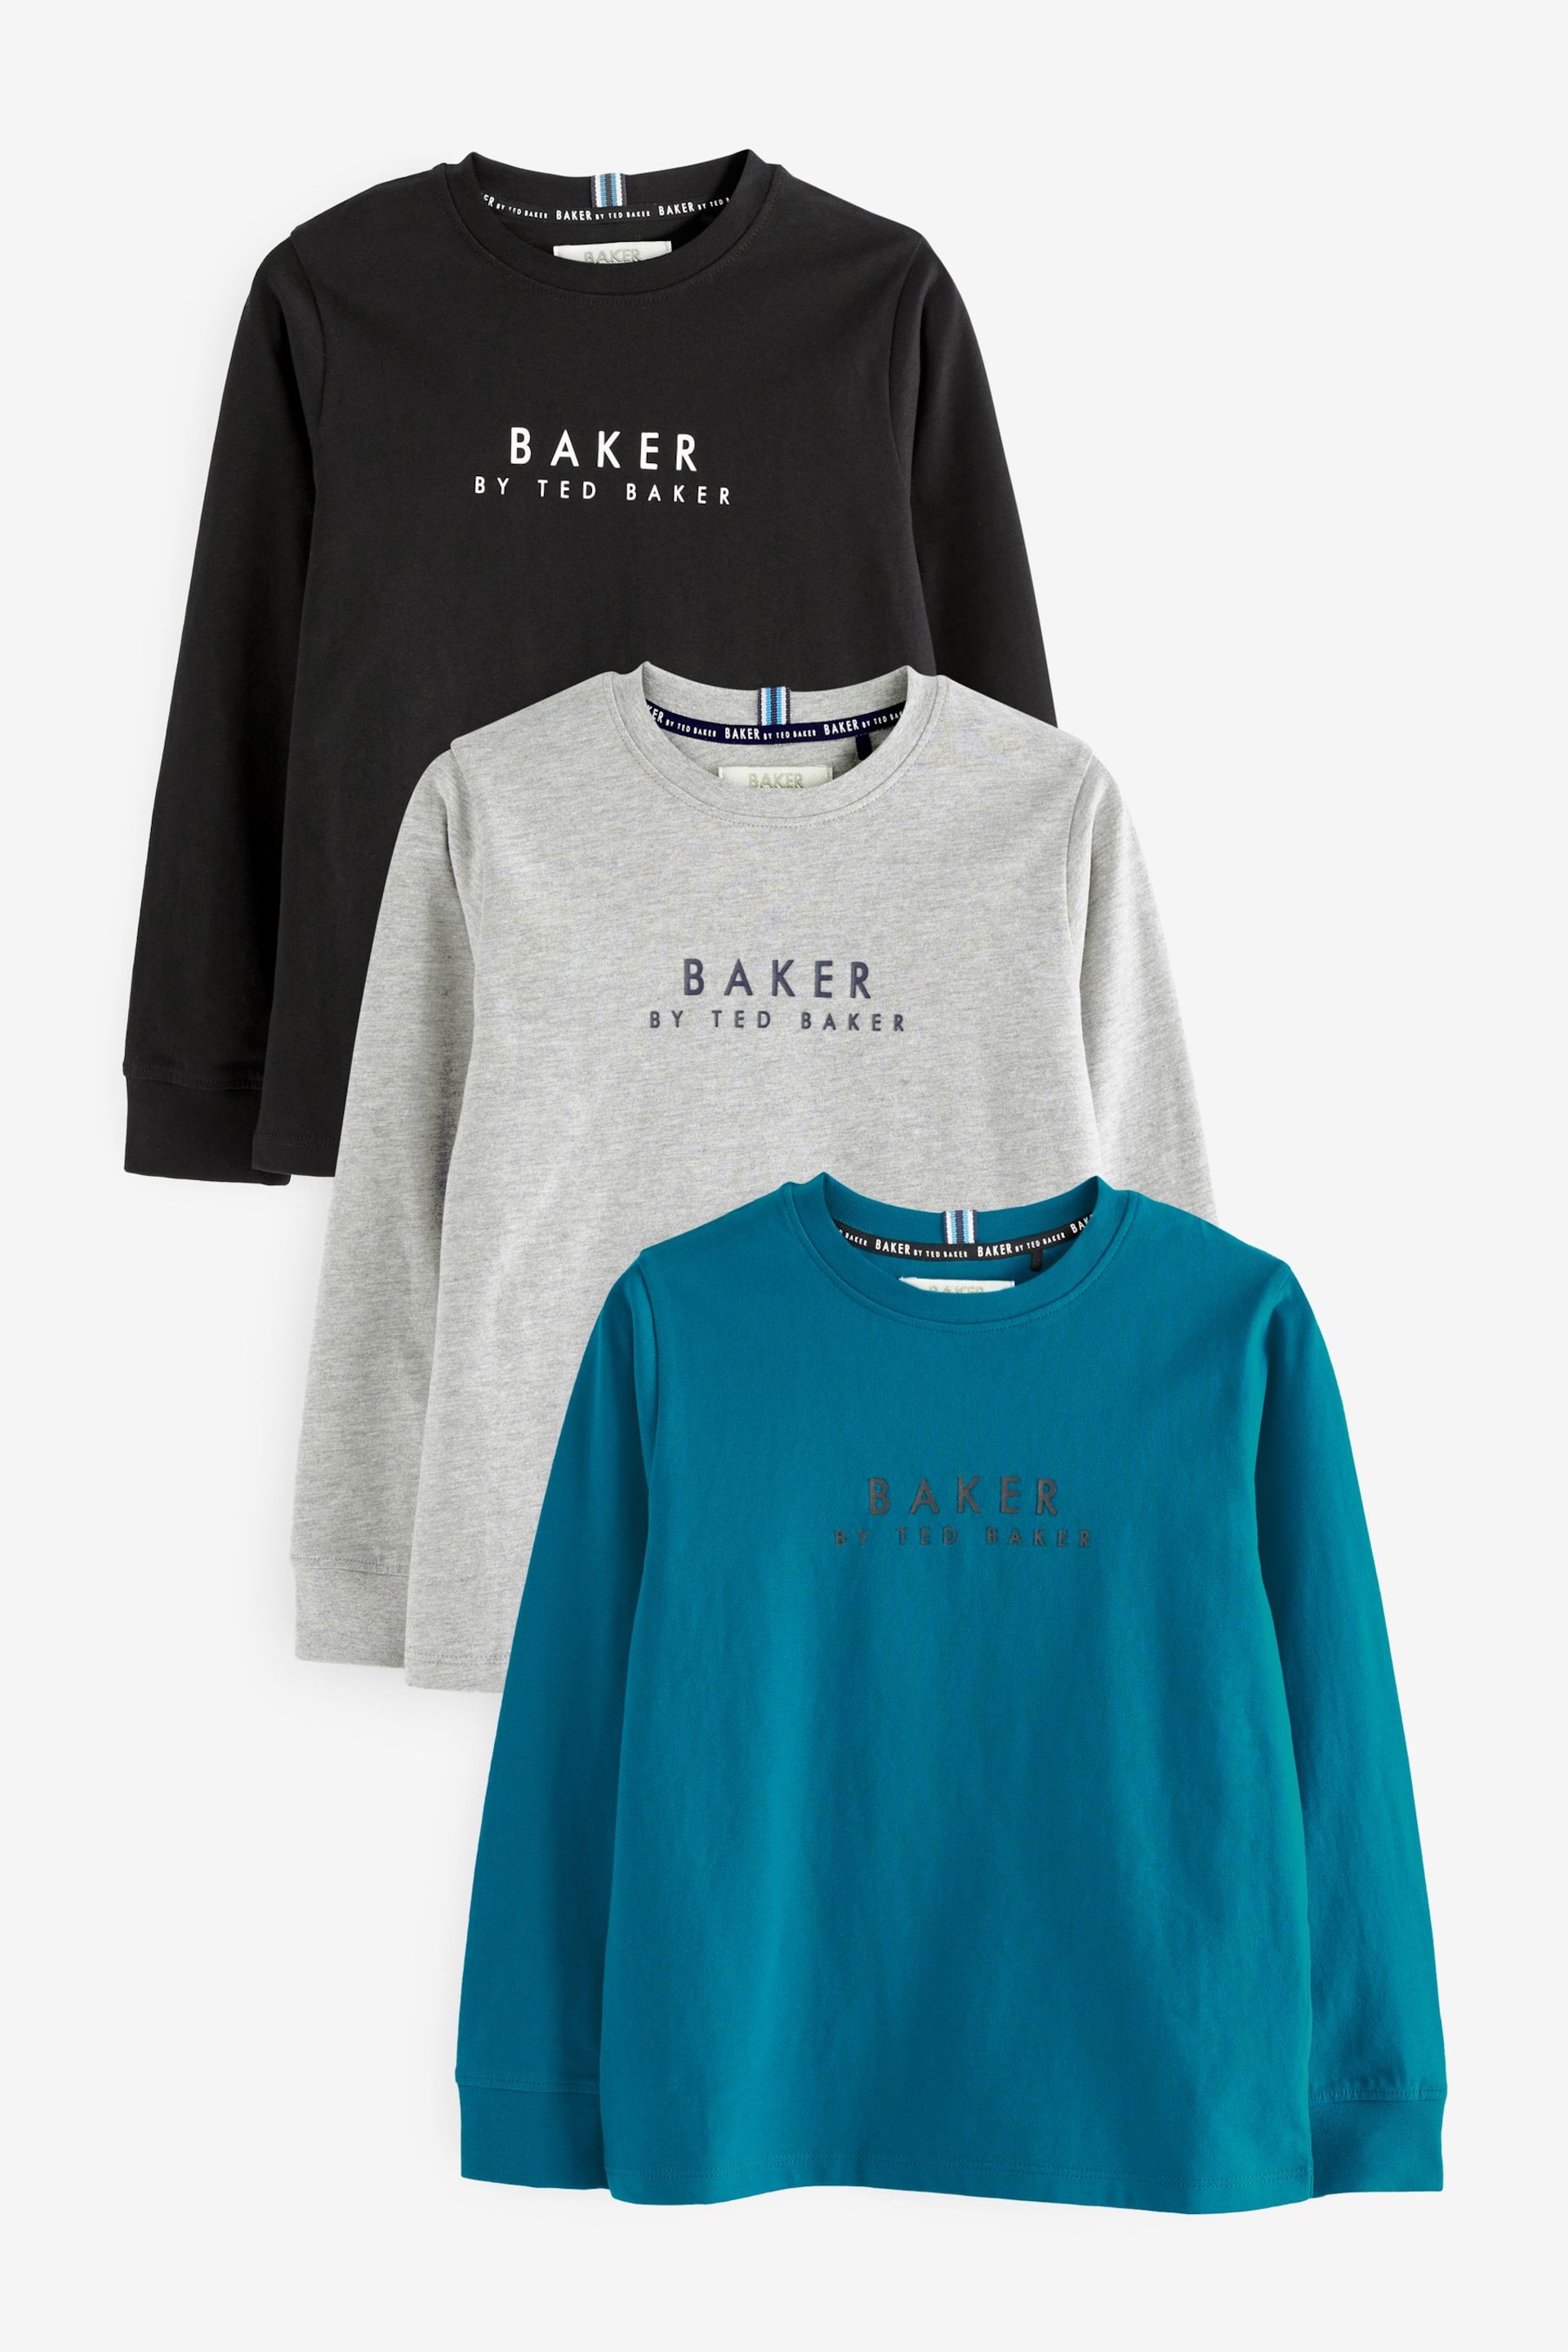 Baker by Ted Baker Long Sleeve T-Shirts 3 Pack - Image 1 of 6